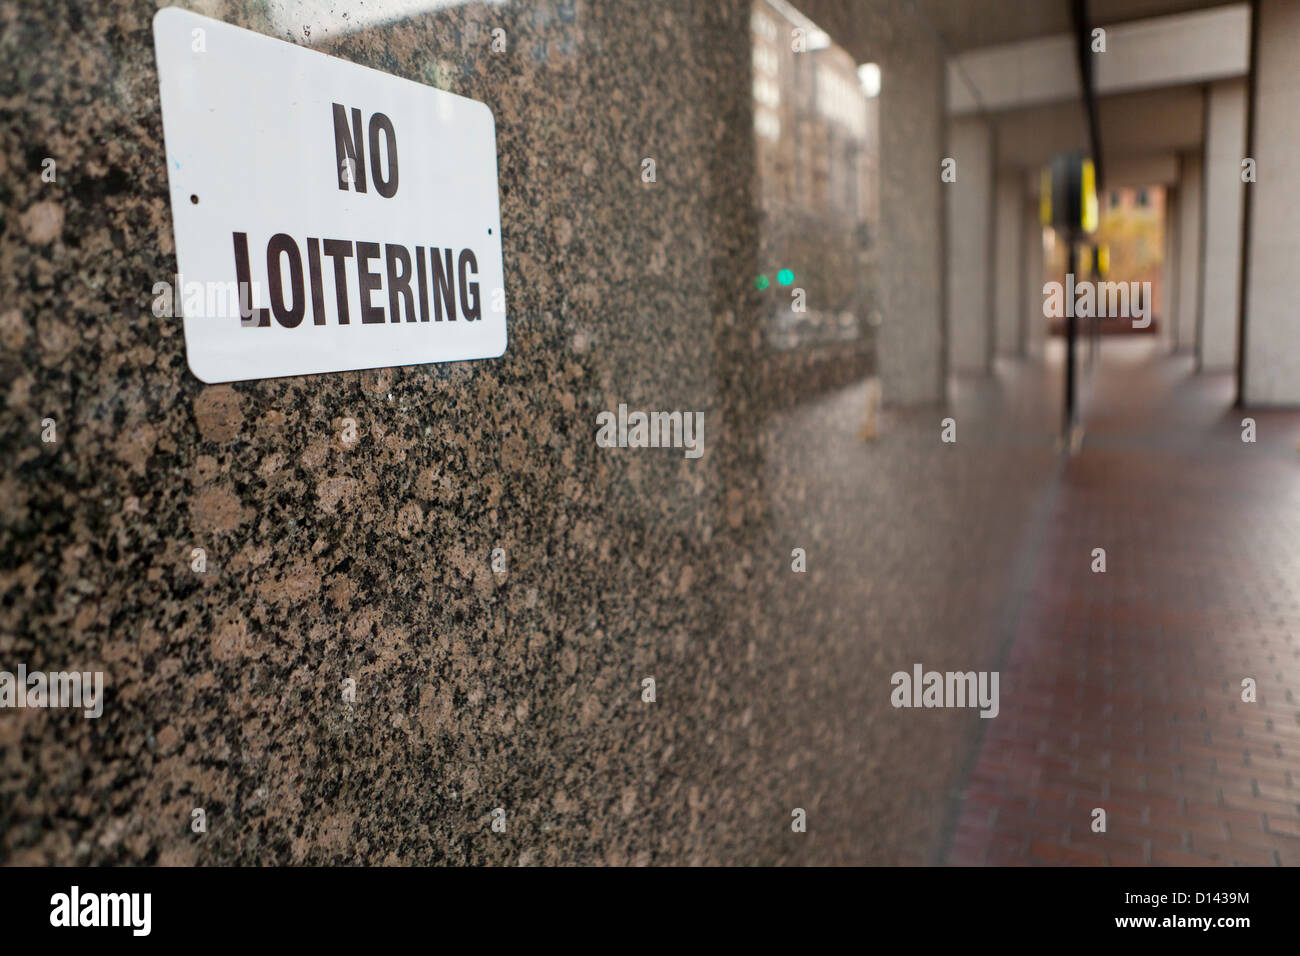 No loitering sign on side of building Stock Photo